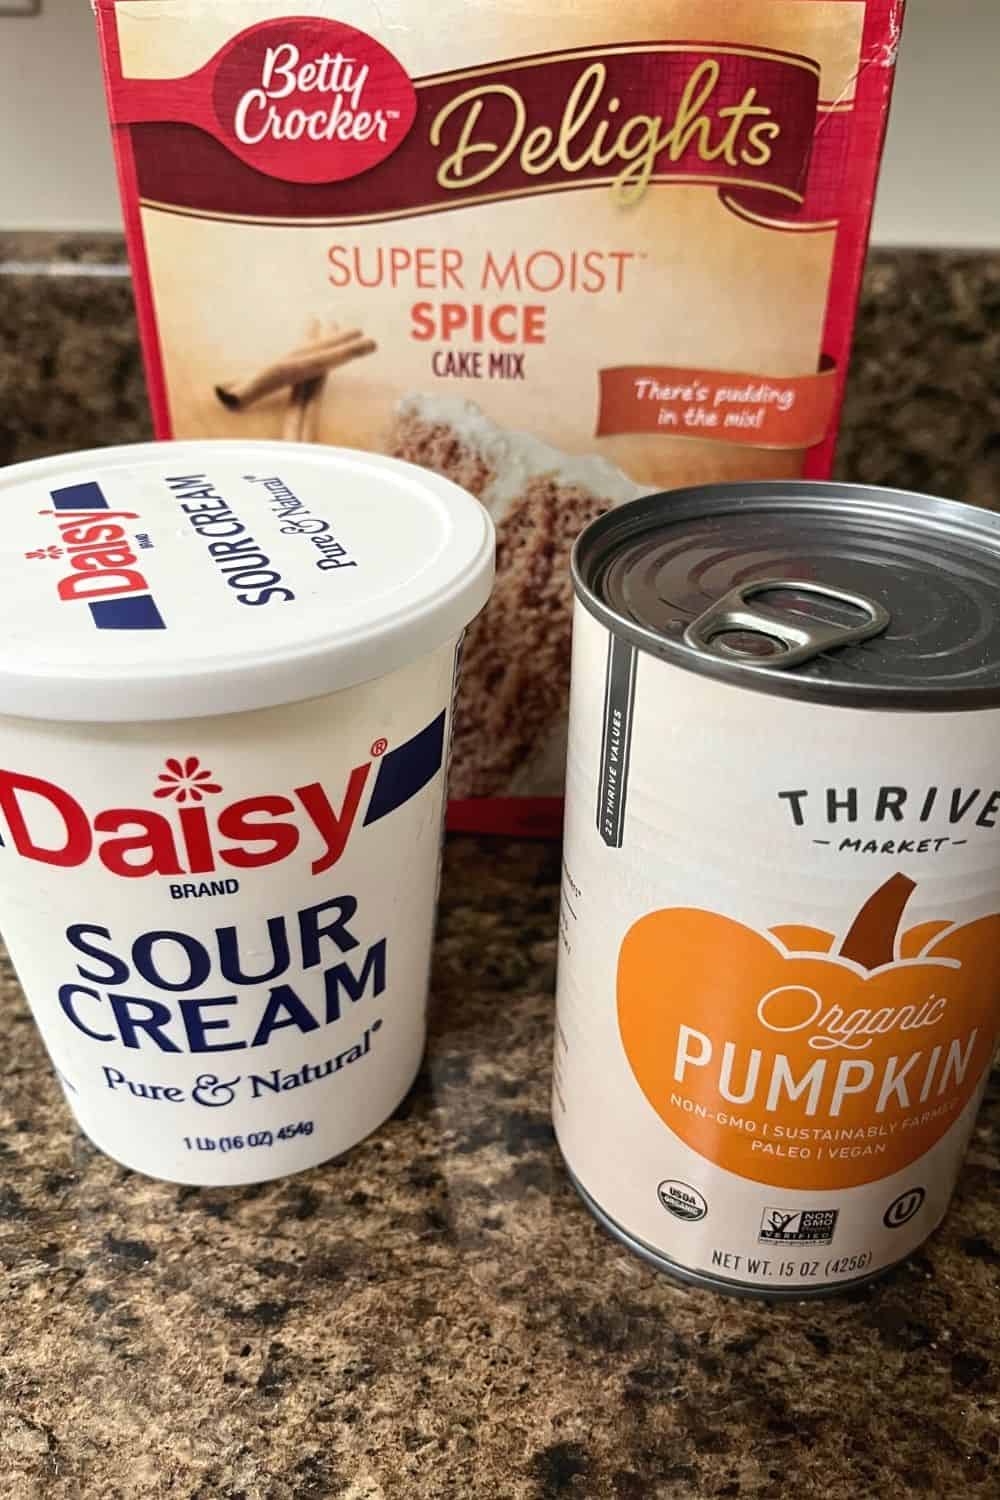 photo showing the ingredients for pumpkin muffins, including a box of spice cake mix, a can of pumpkin puree, and some sour cream